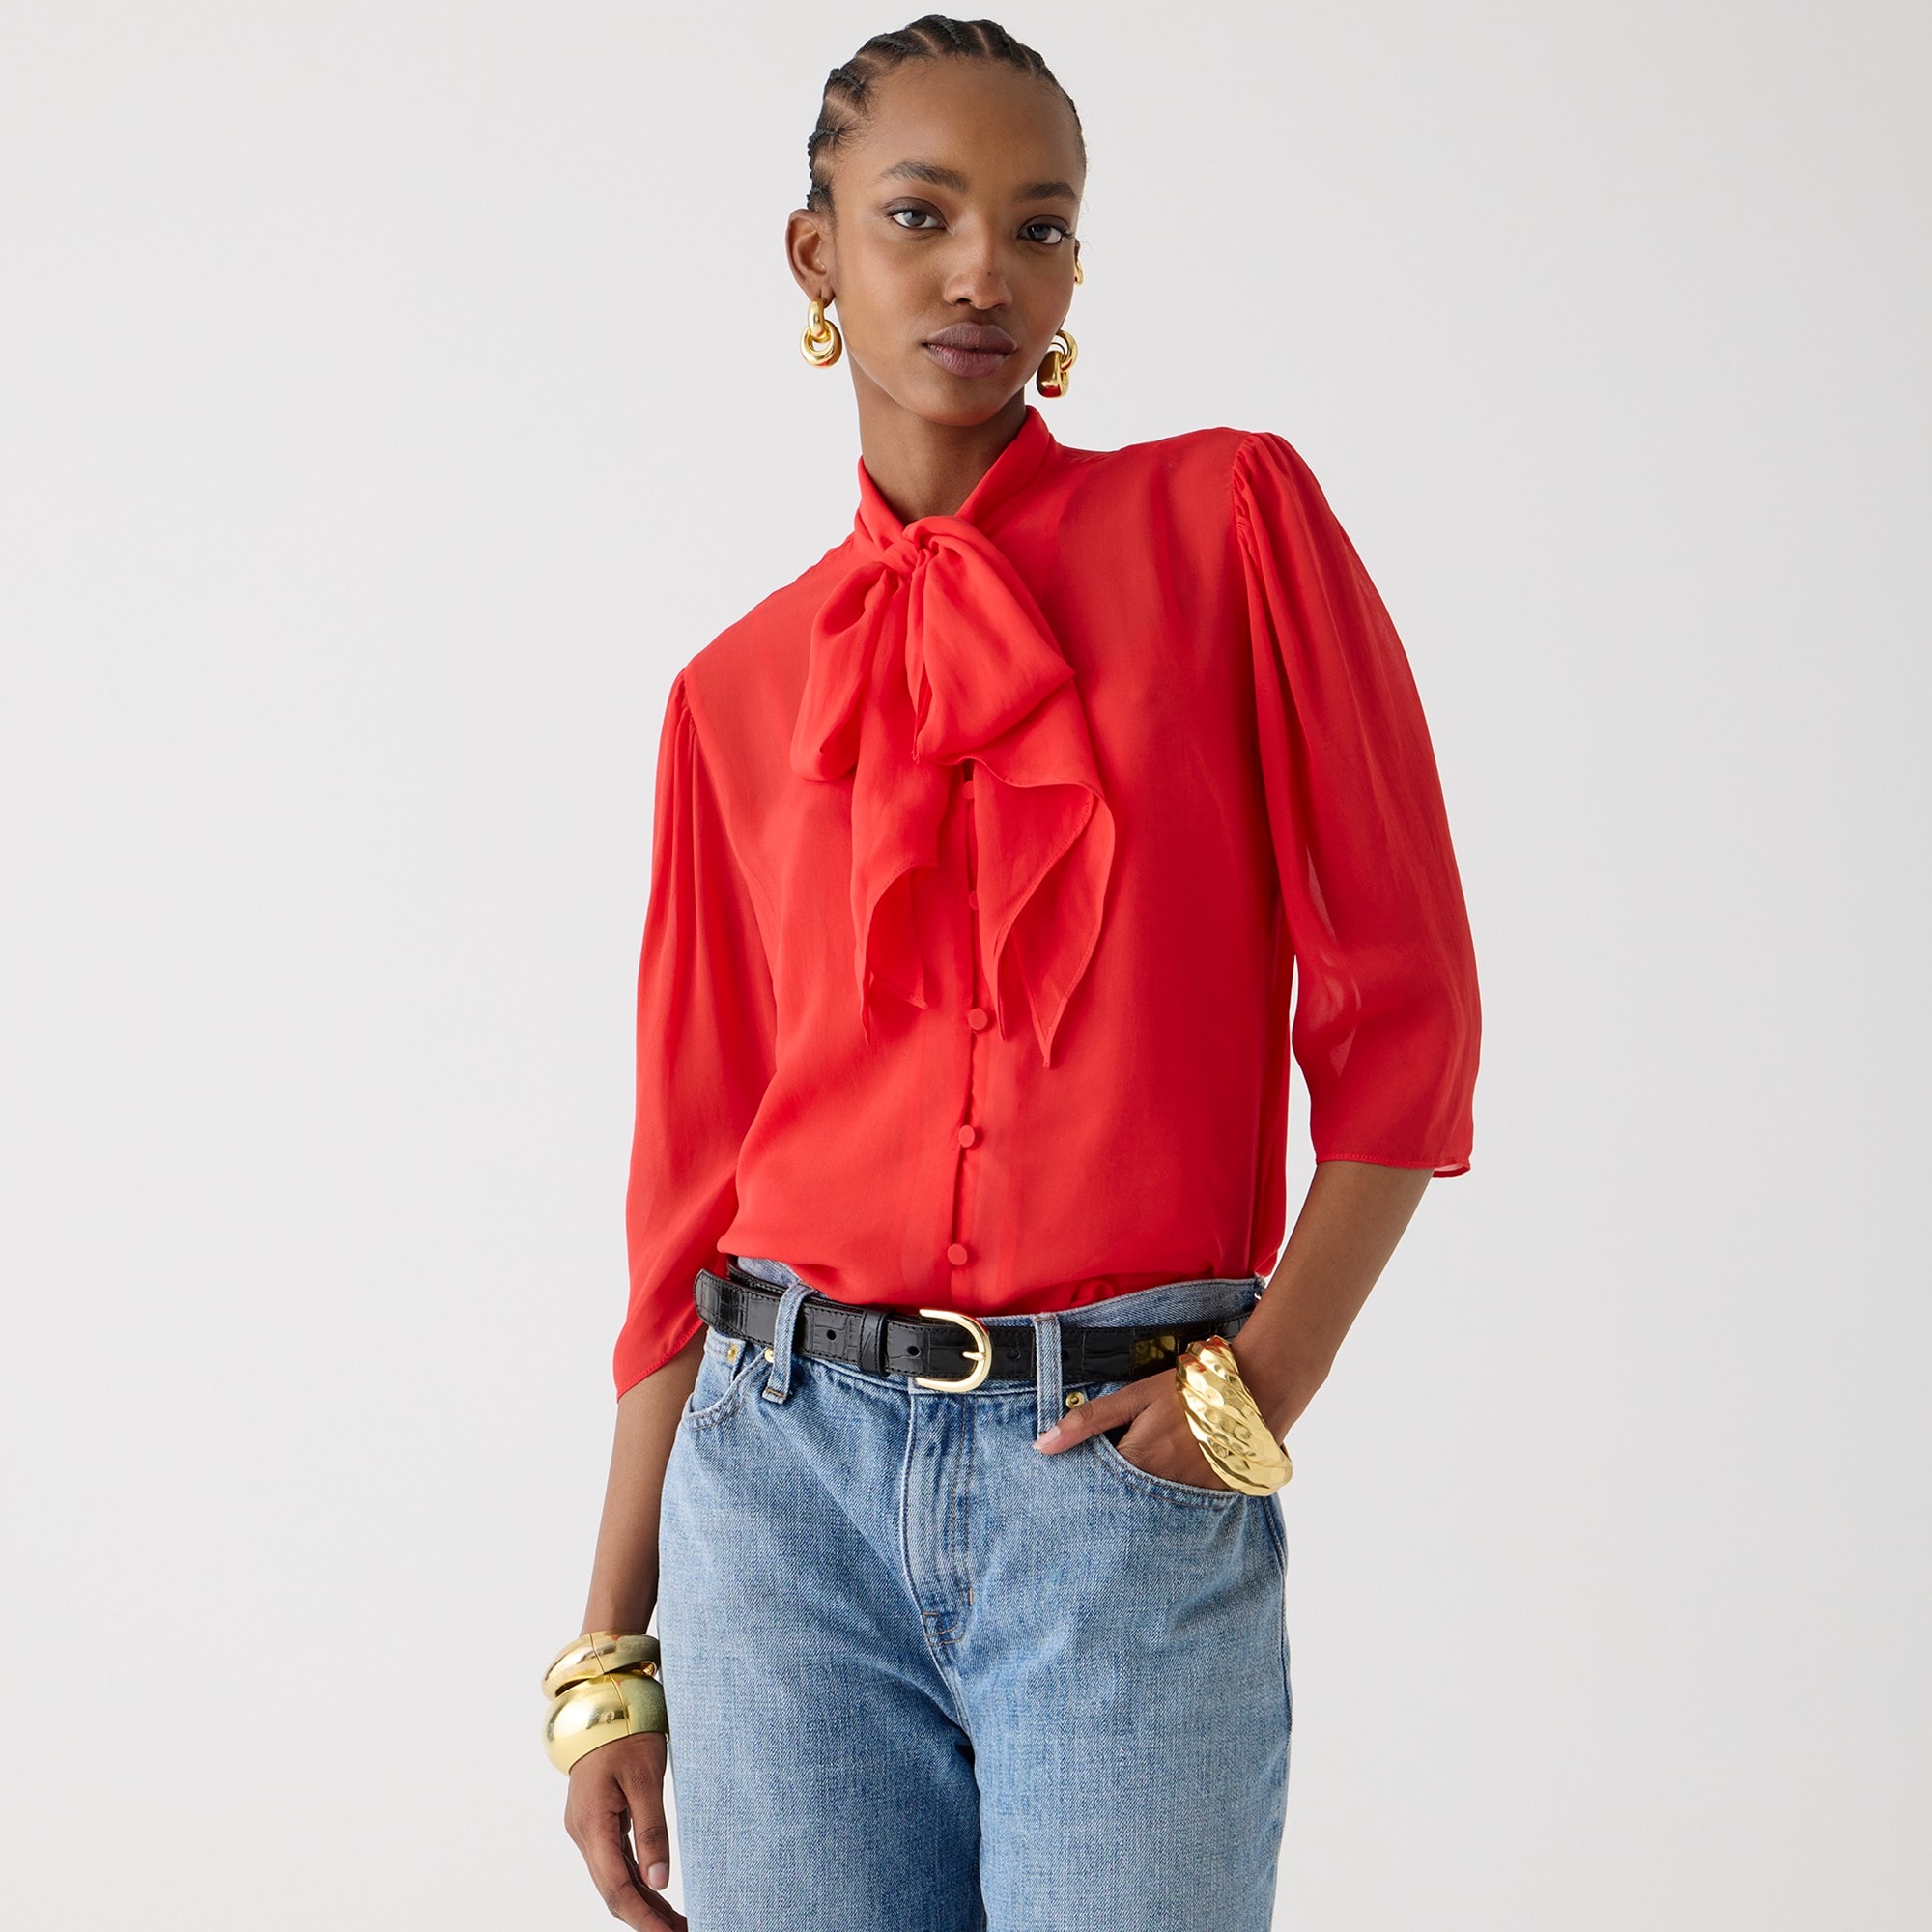 womens Tie-neck button-up top in sheer chiffon